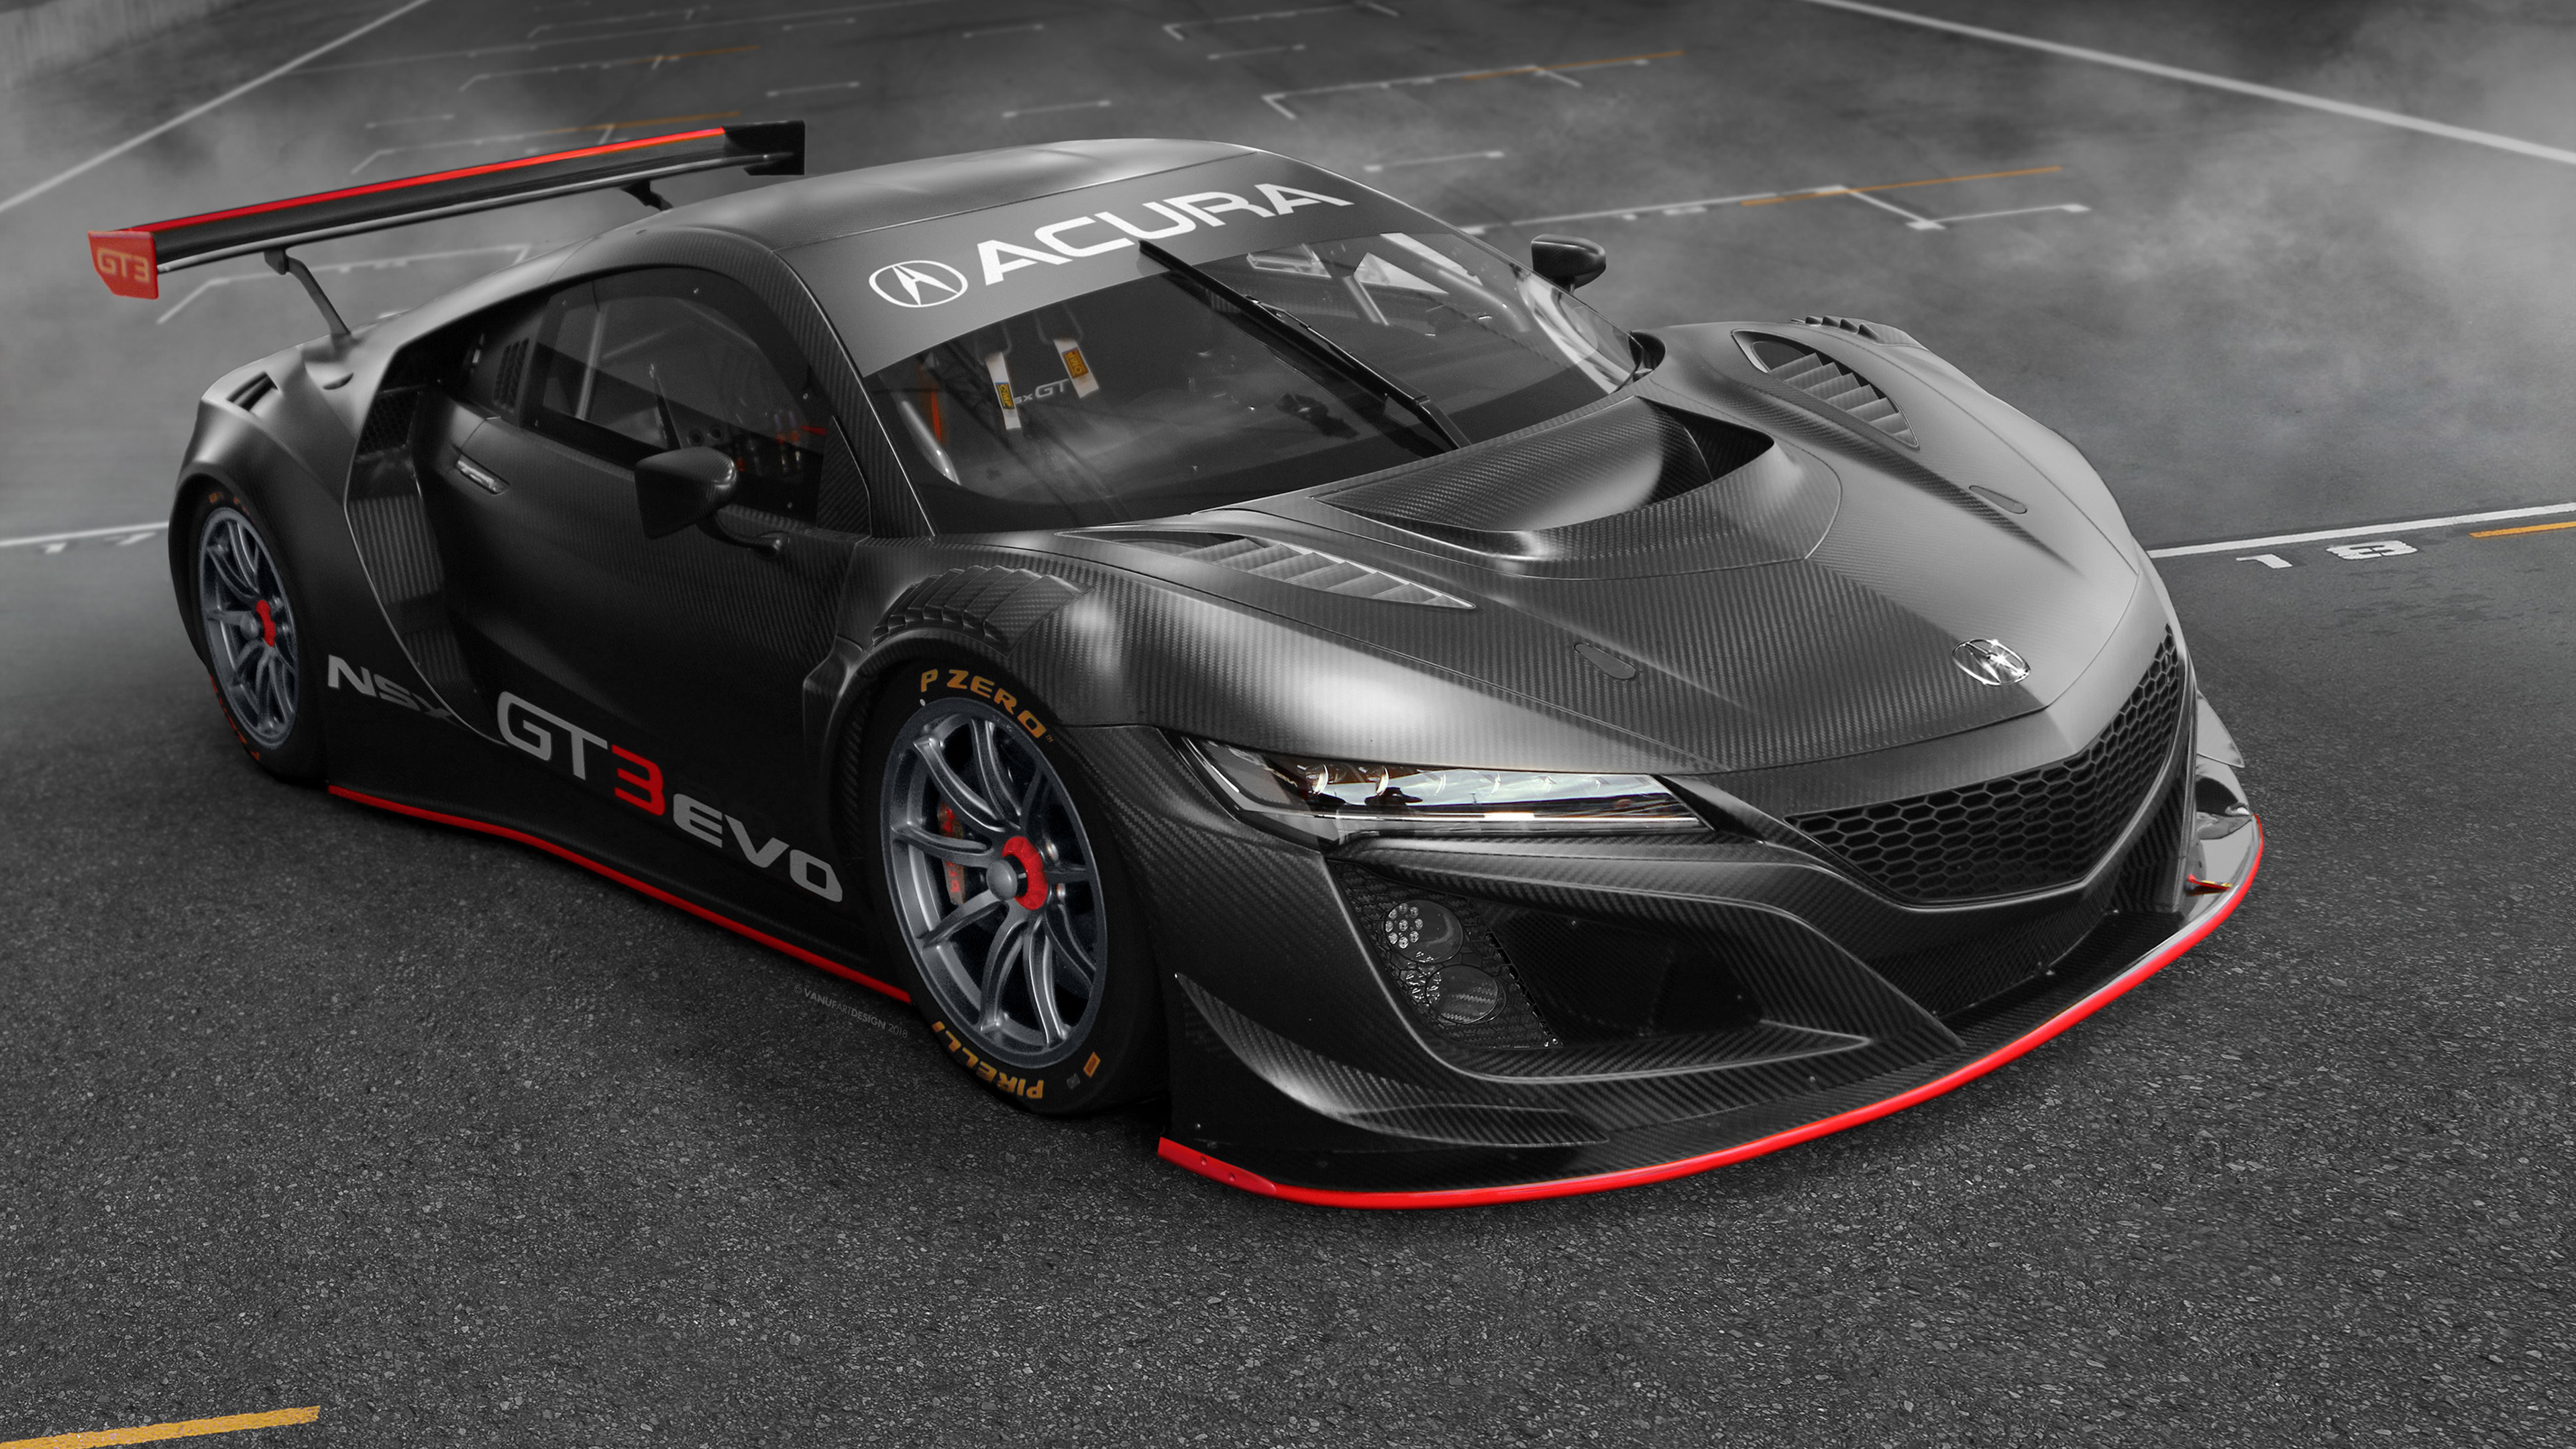 Acura NSX GT3 Evo 2019 4K Wallpapers